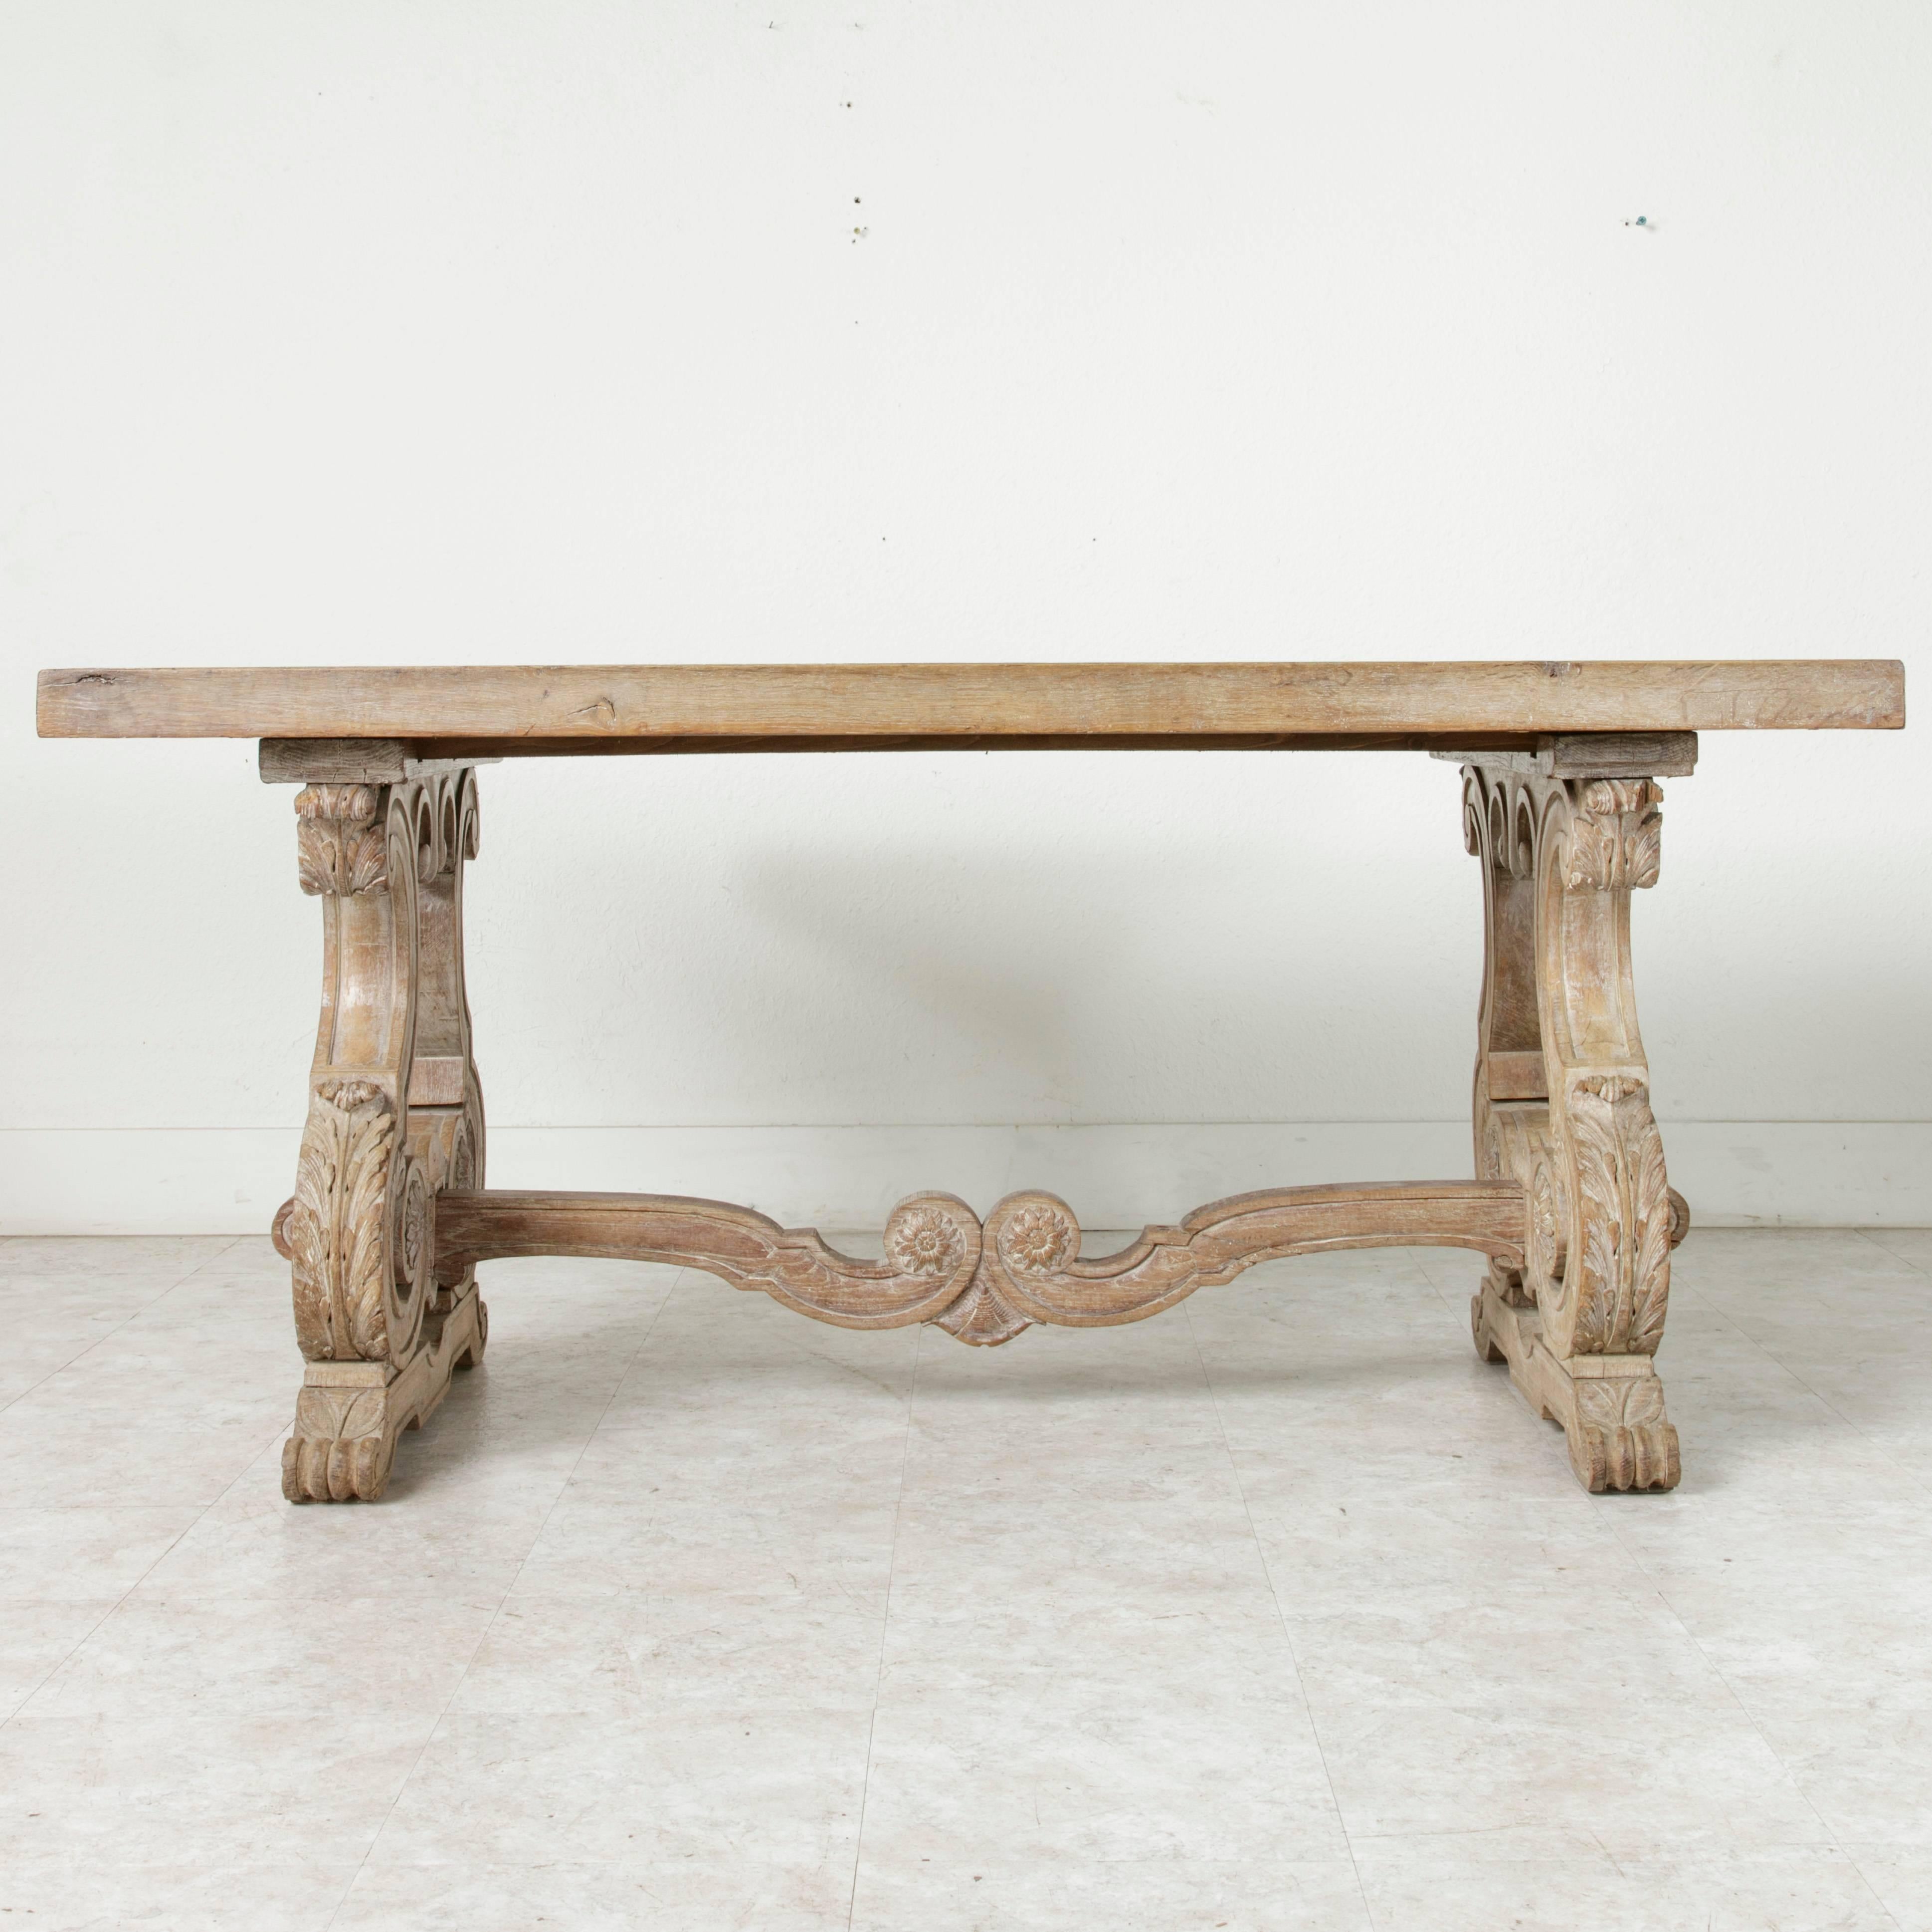 Carved Late 19th Century, French Renaissance and Gustavian Style Oak Parquet Table